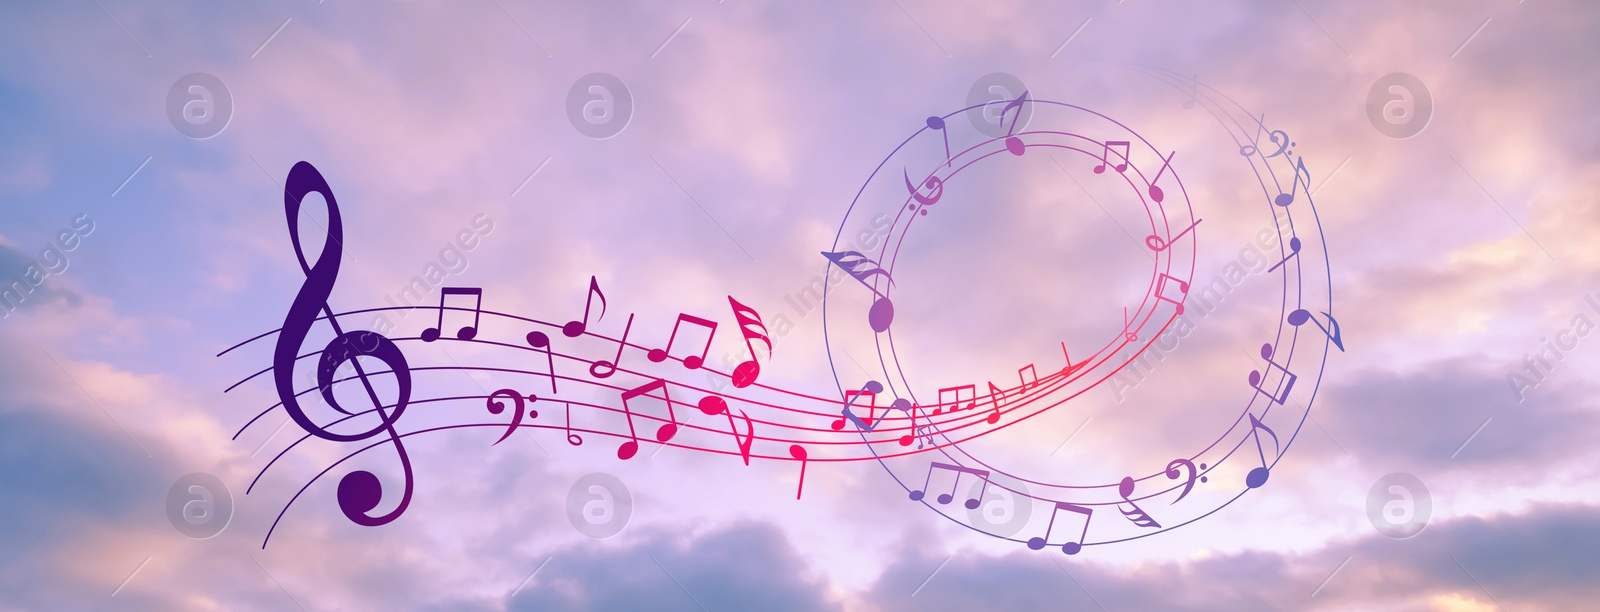 Image of Treble clef and swirly staff with musical notes against sunset sky, banner design